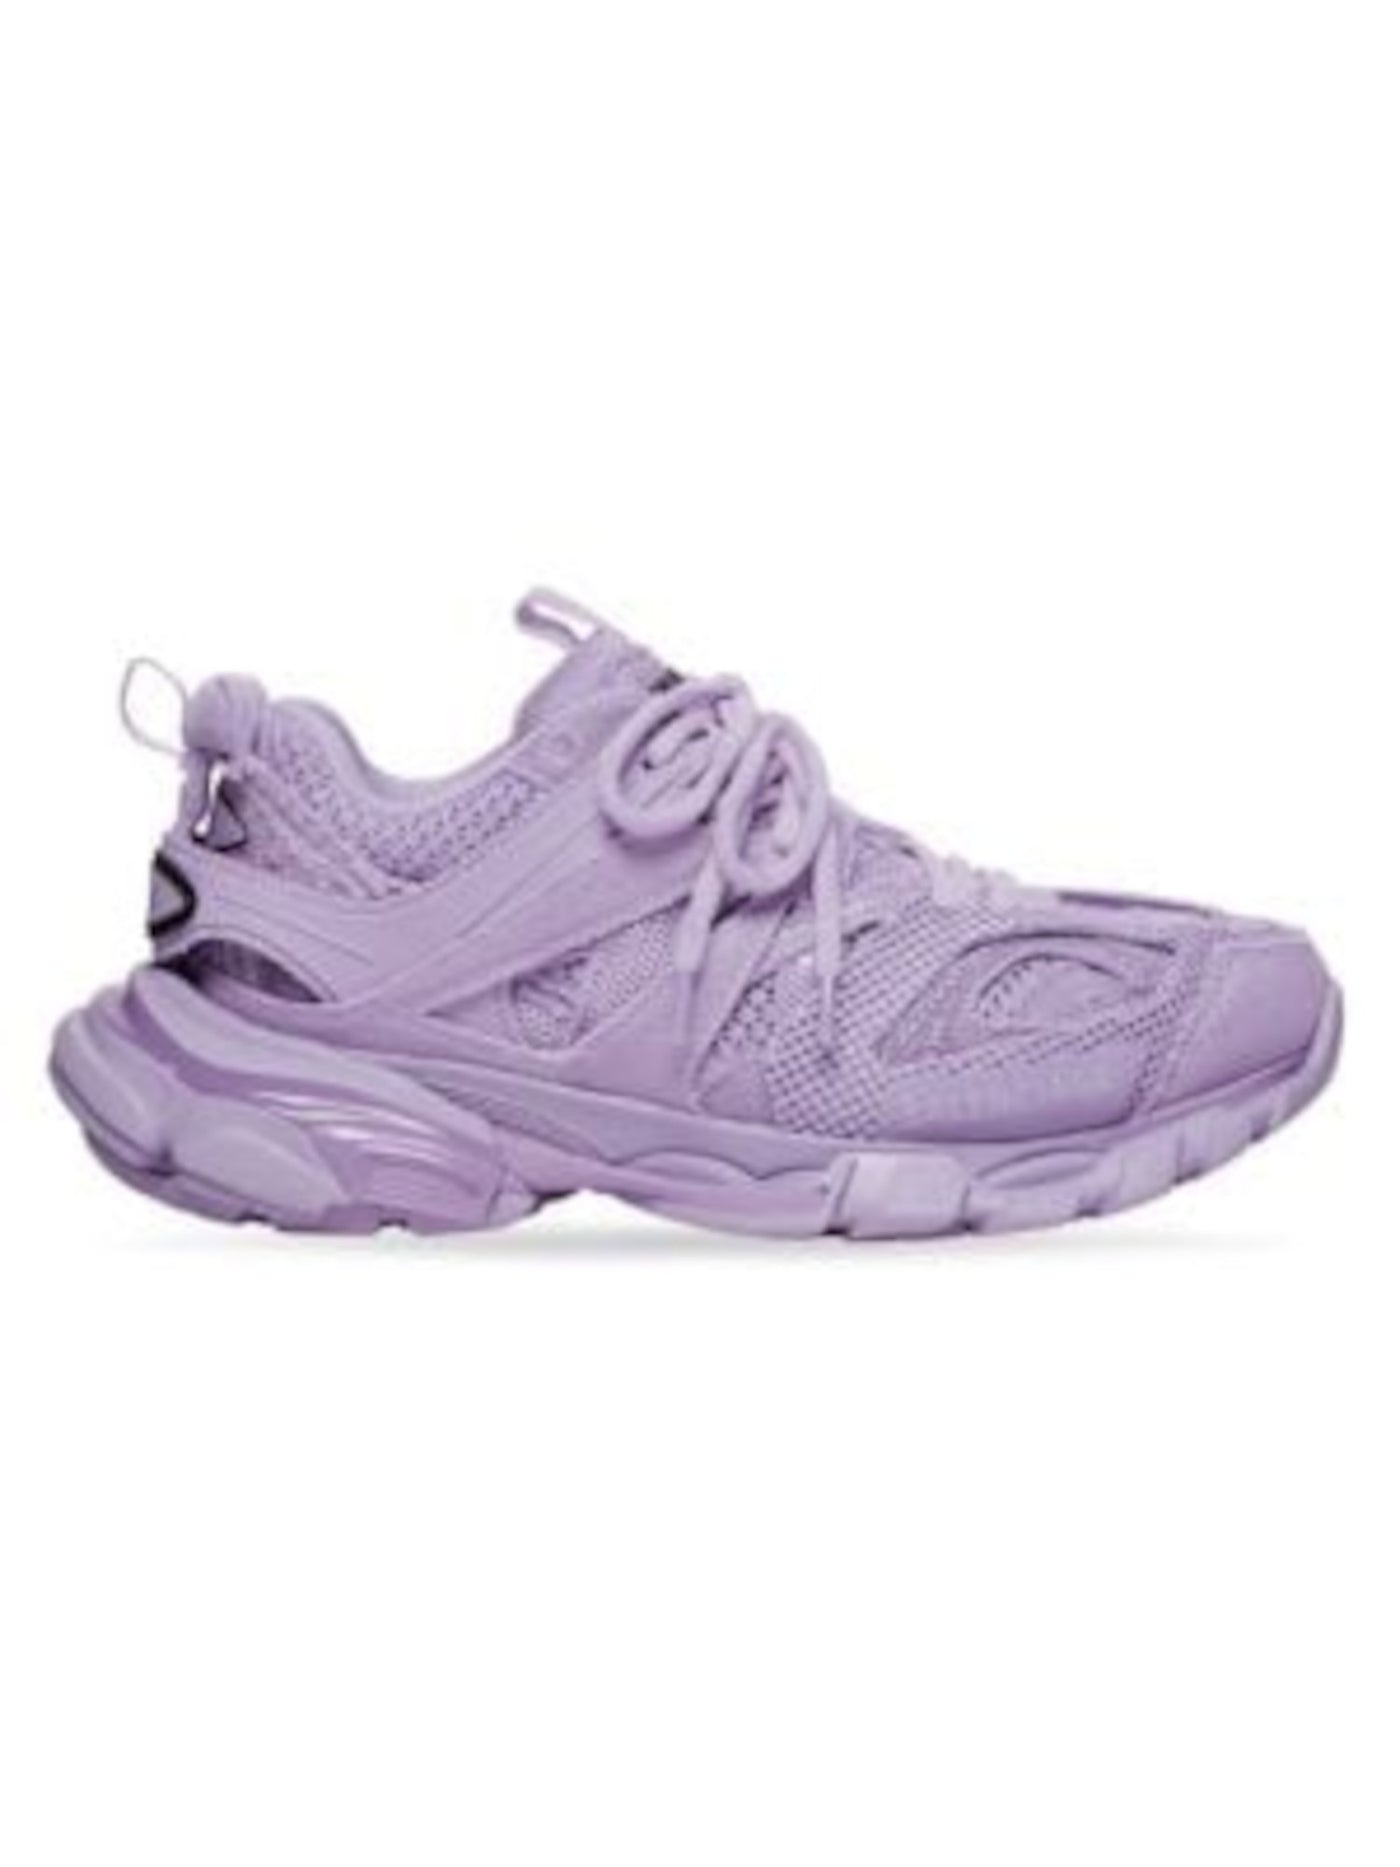 BALENCIAGA Womens Purple Comfort Logo Track Round Toe Lace-Up Athletic Sneakers Shoes 12